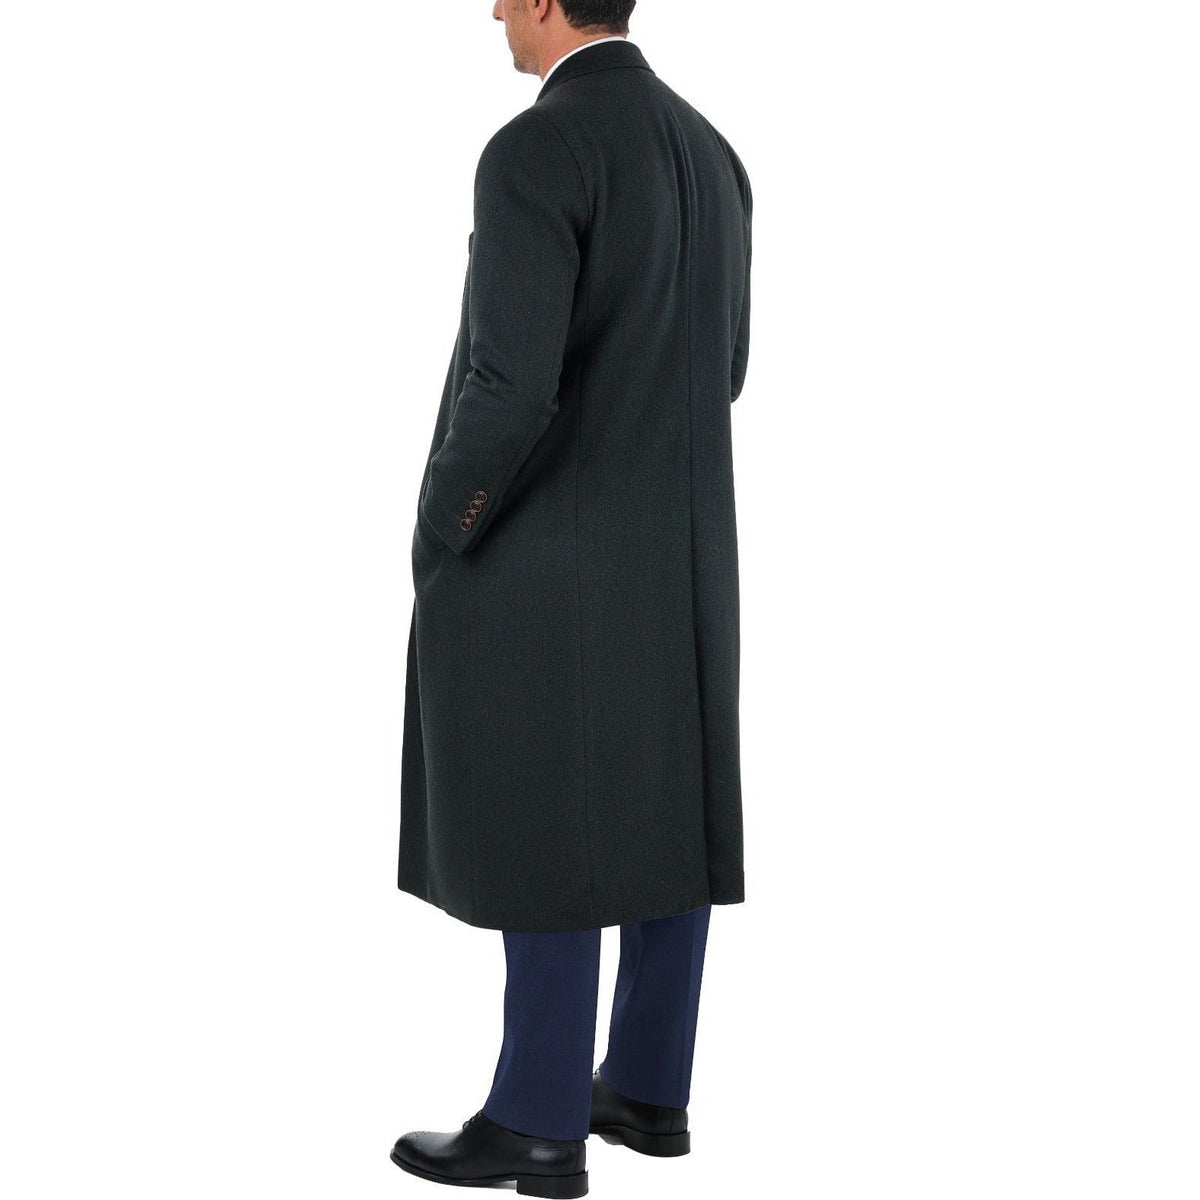 Label E OUTERWEAR Mens Regular Fit Solid Hunter Green Full Length Wool Cashmere Overcoat Top Coat